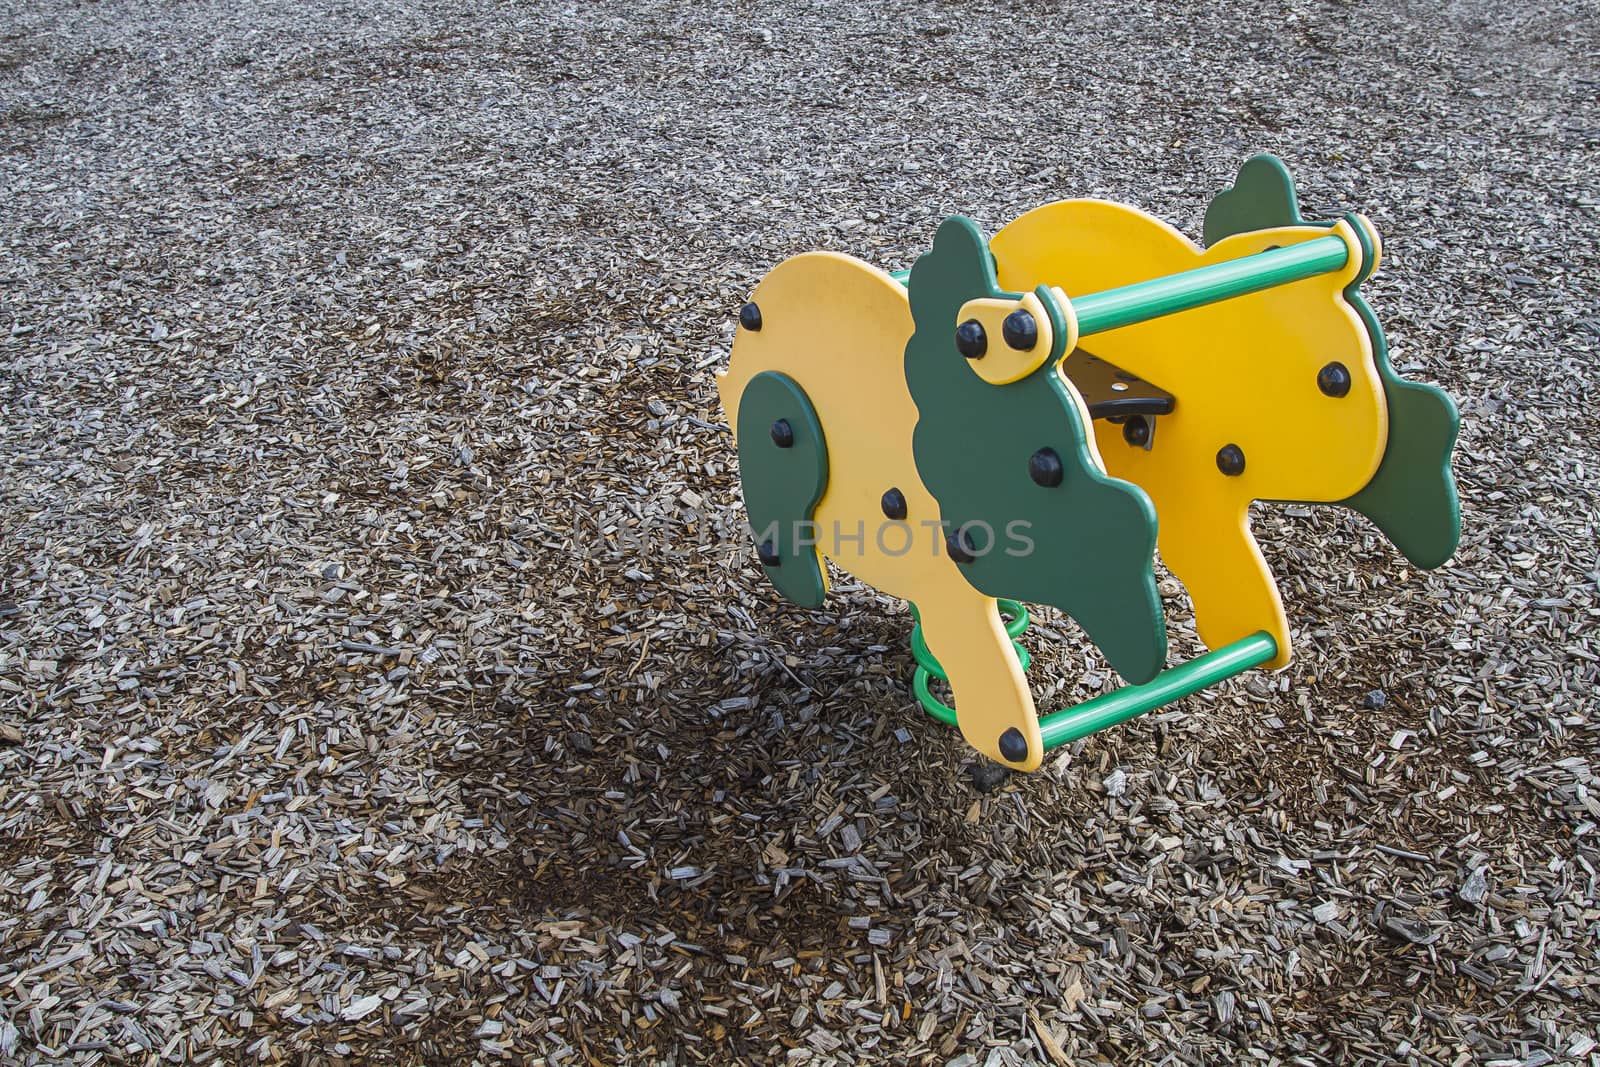 Park game in the shape of a Triceratop on wood chip ground